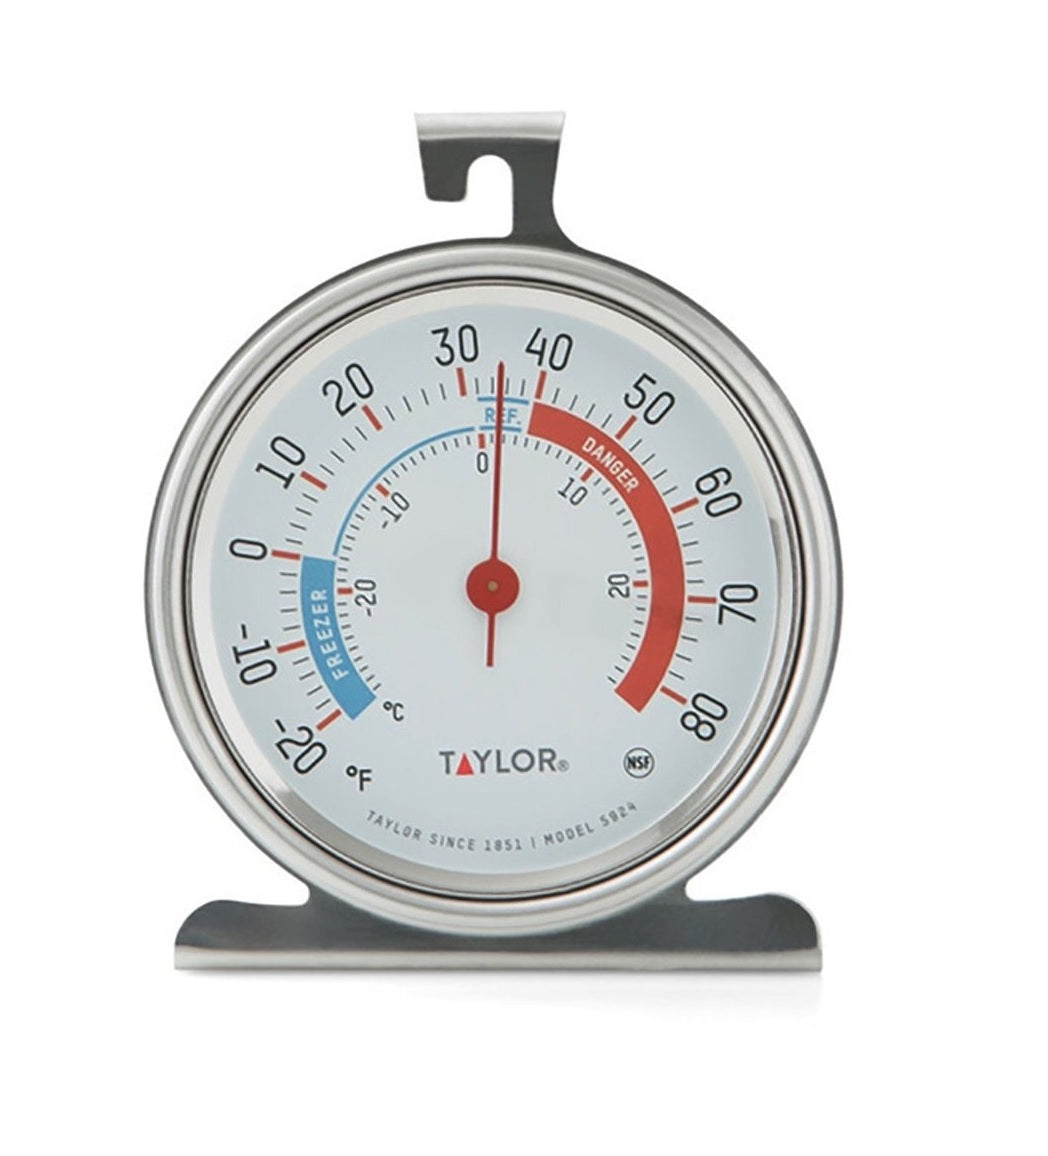 Taylor 5924 Refrigerator Thermometer, 3-1/4" X 3-3/4", Stainless Steel